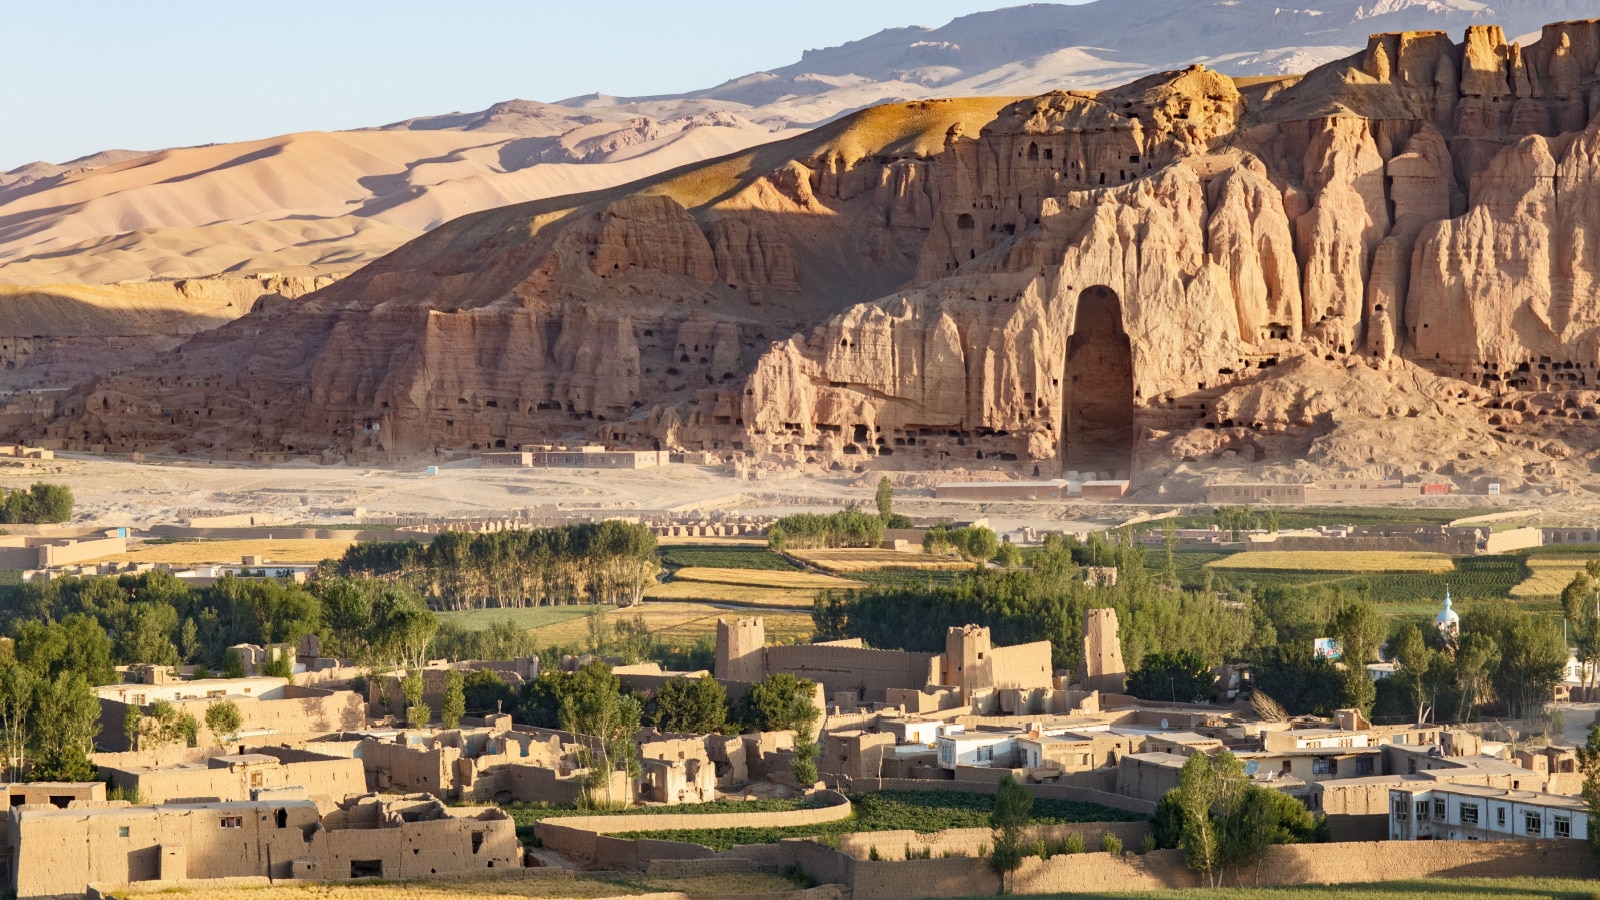 Afghanistan, Bamiyan (Bamian or Bamyan), cultural landscape and archeological remains, UNESCO World Heritage site, overview of the valley, town and empty niches where Buddha statues were destroyed